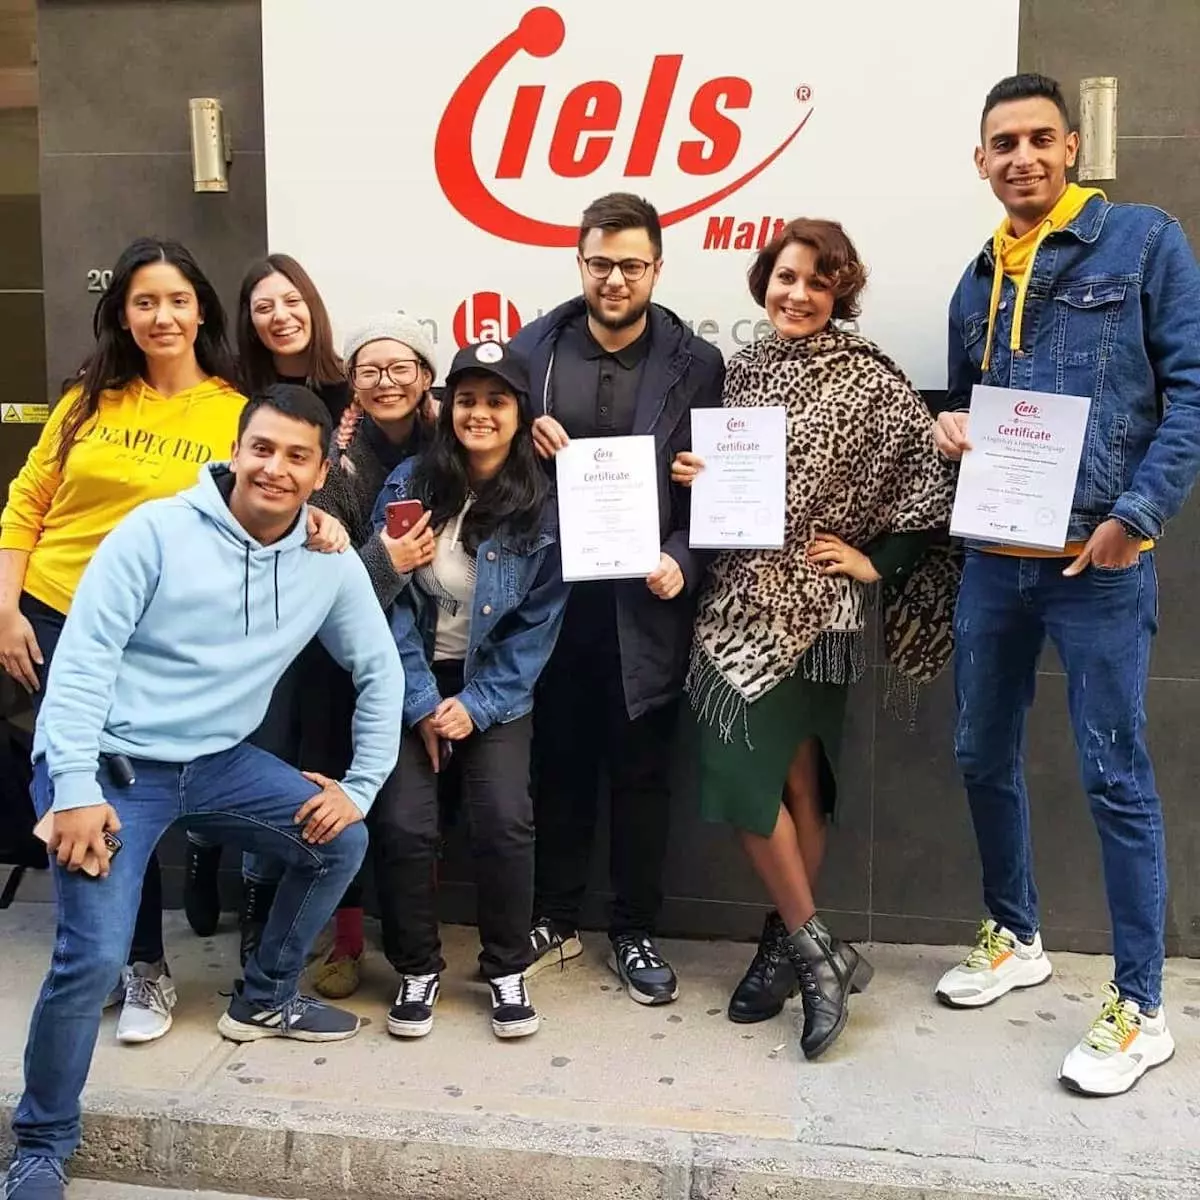 Group of 8 students with their language study completion certificate at IELS Malta